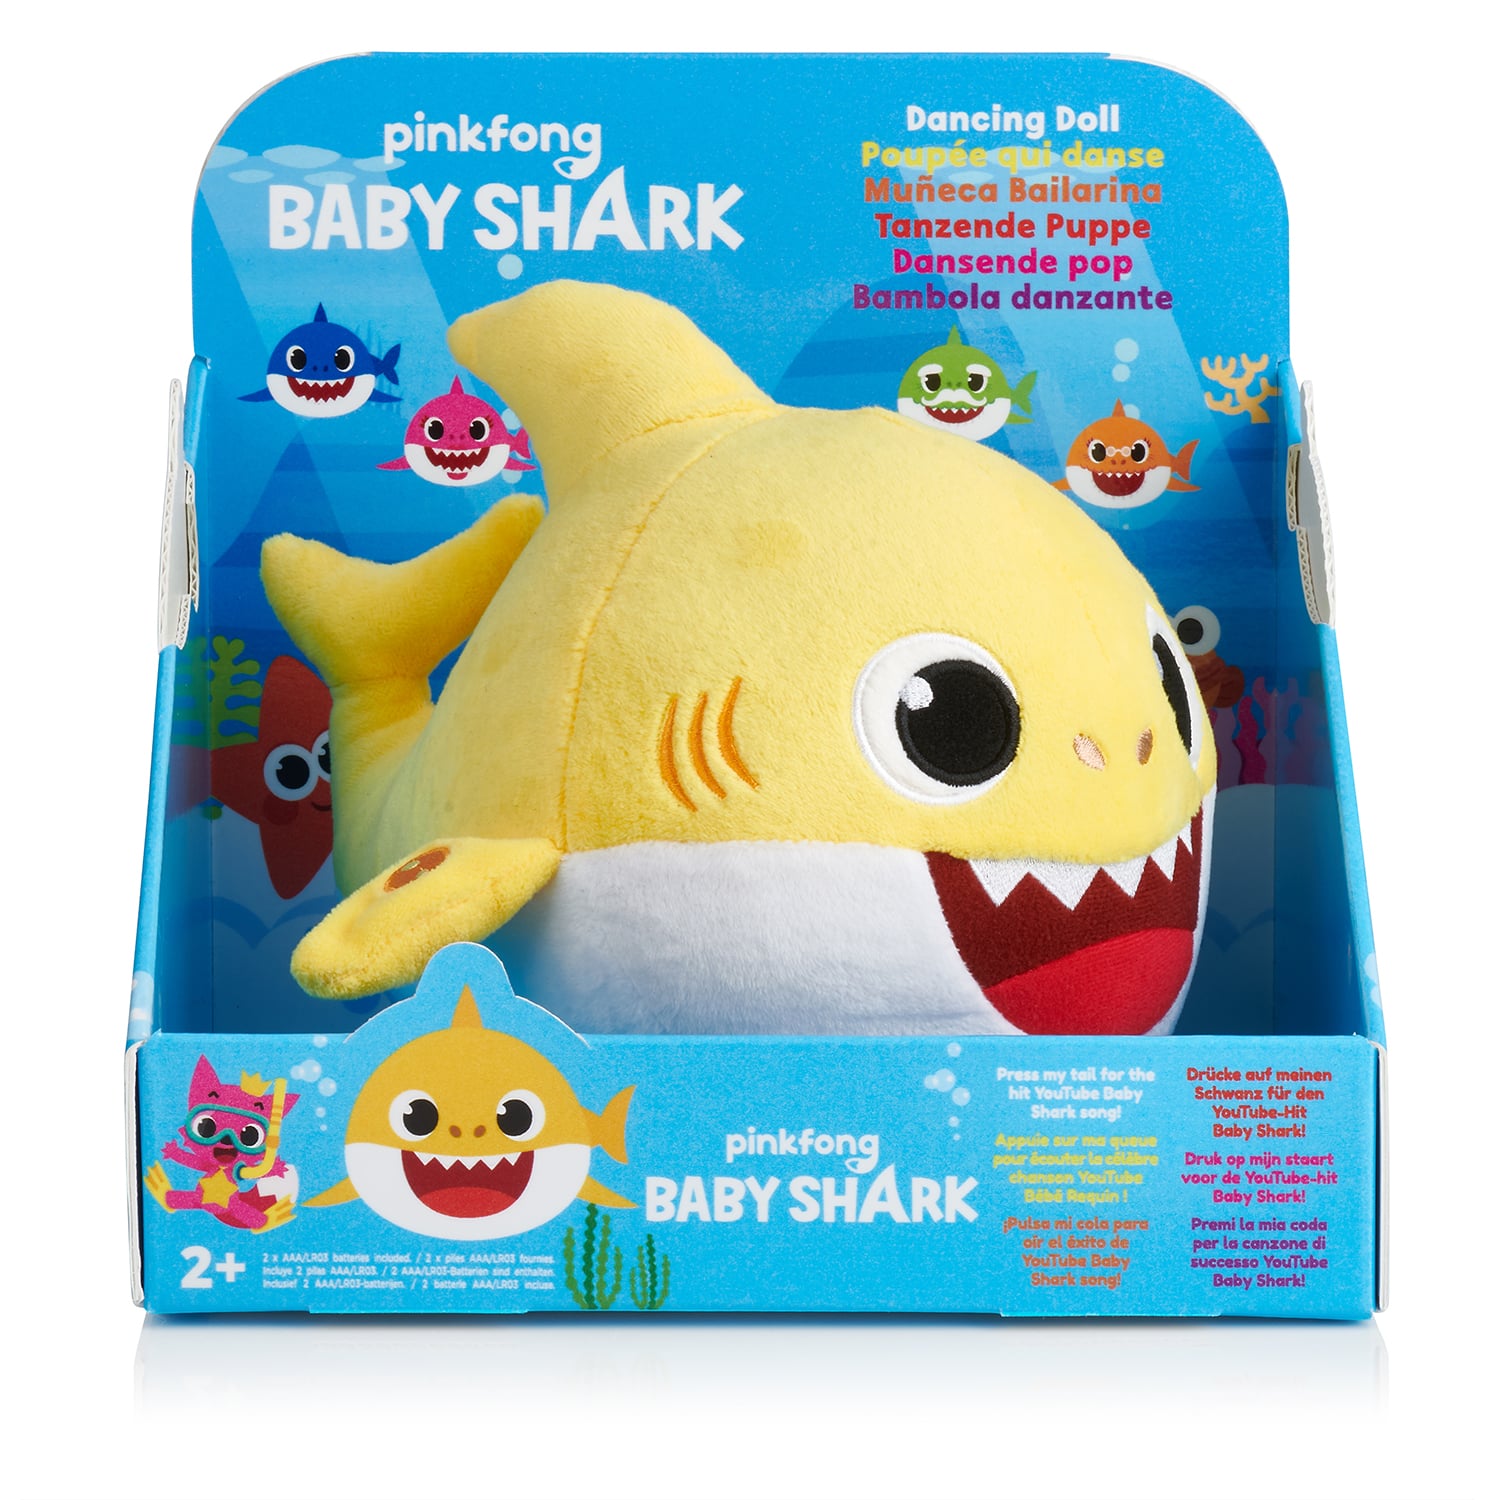 pinkfong baby shark official singing plush